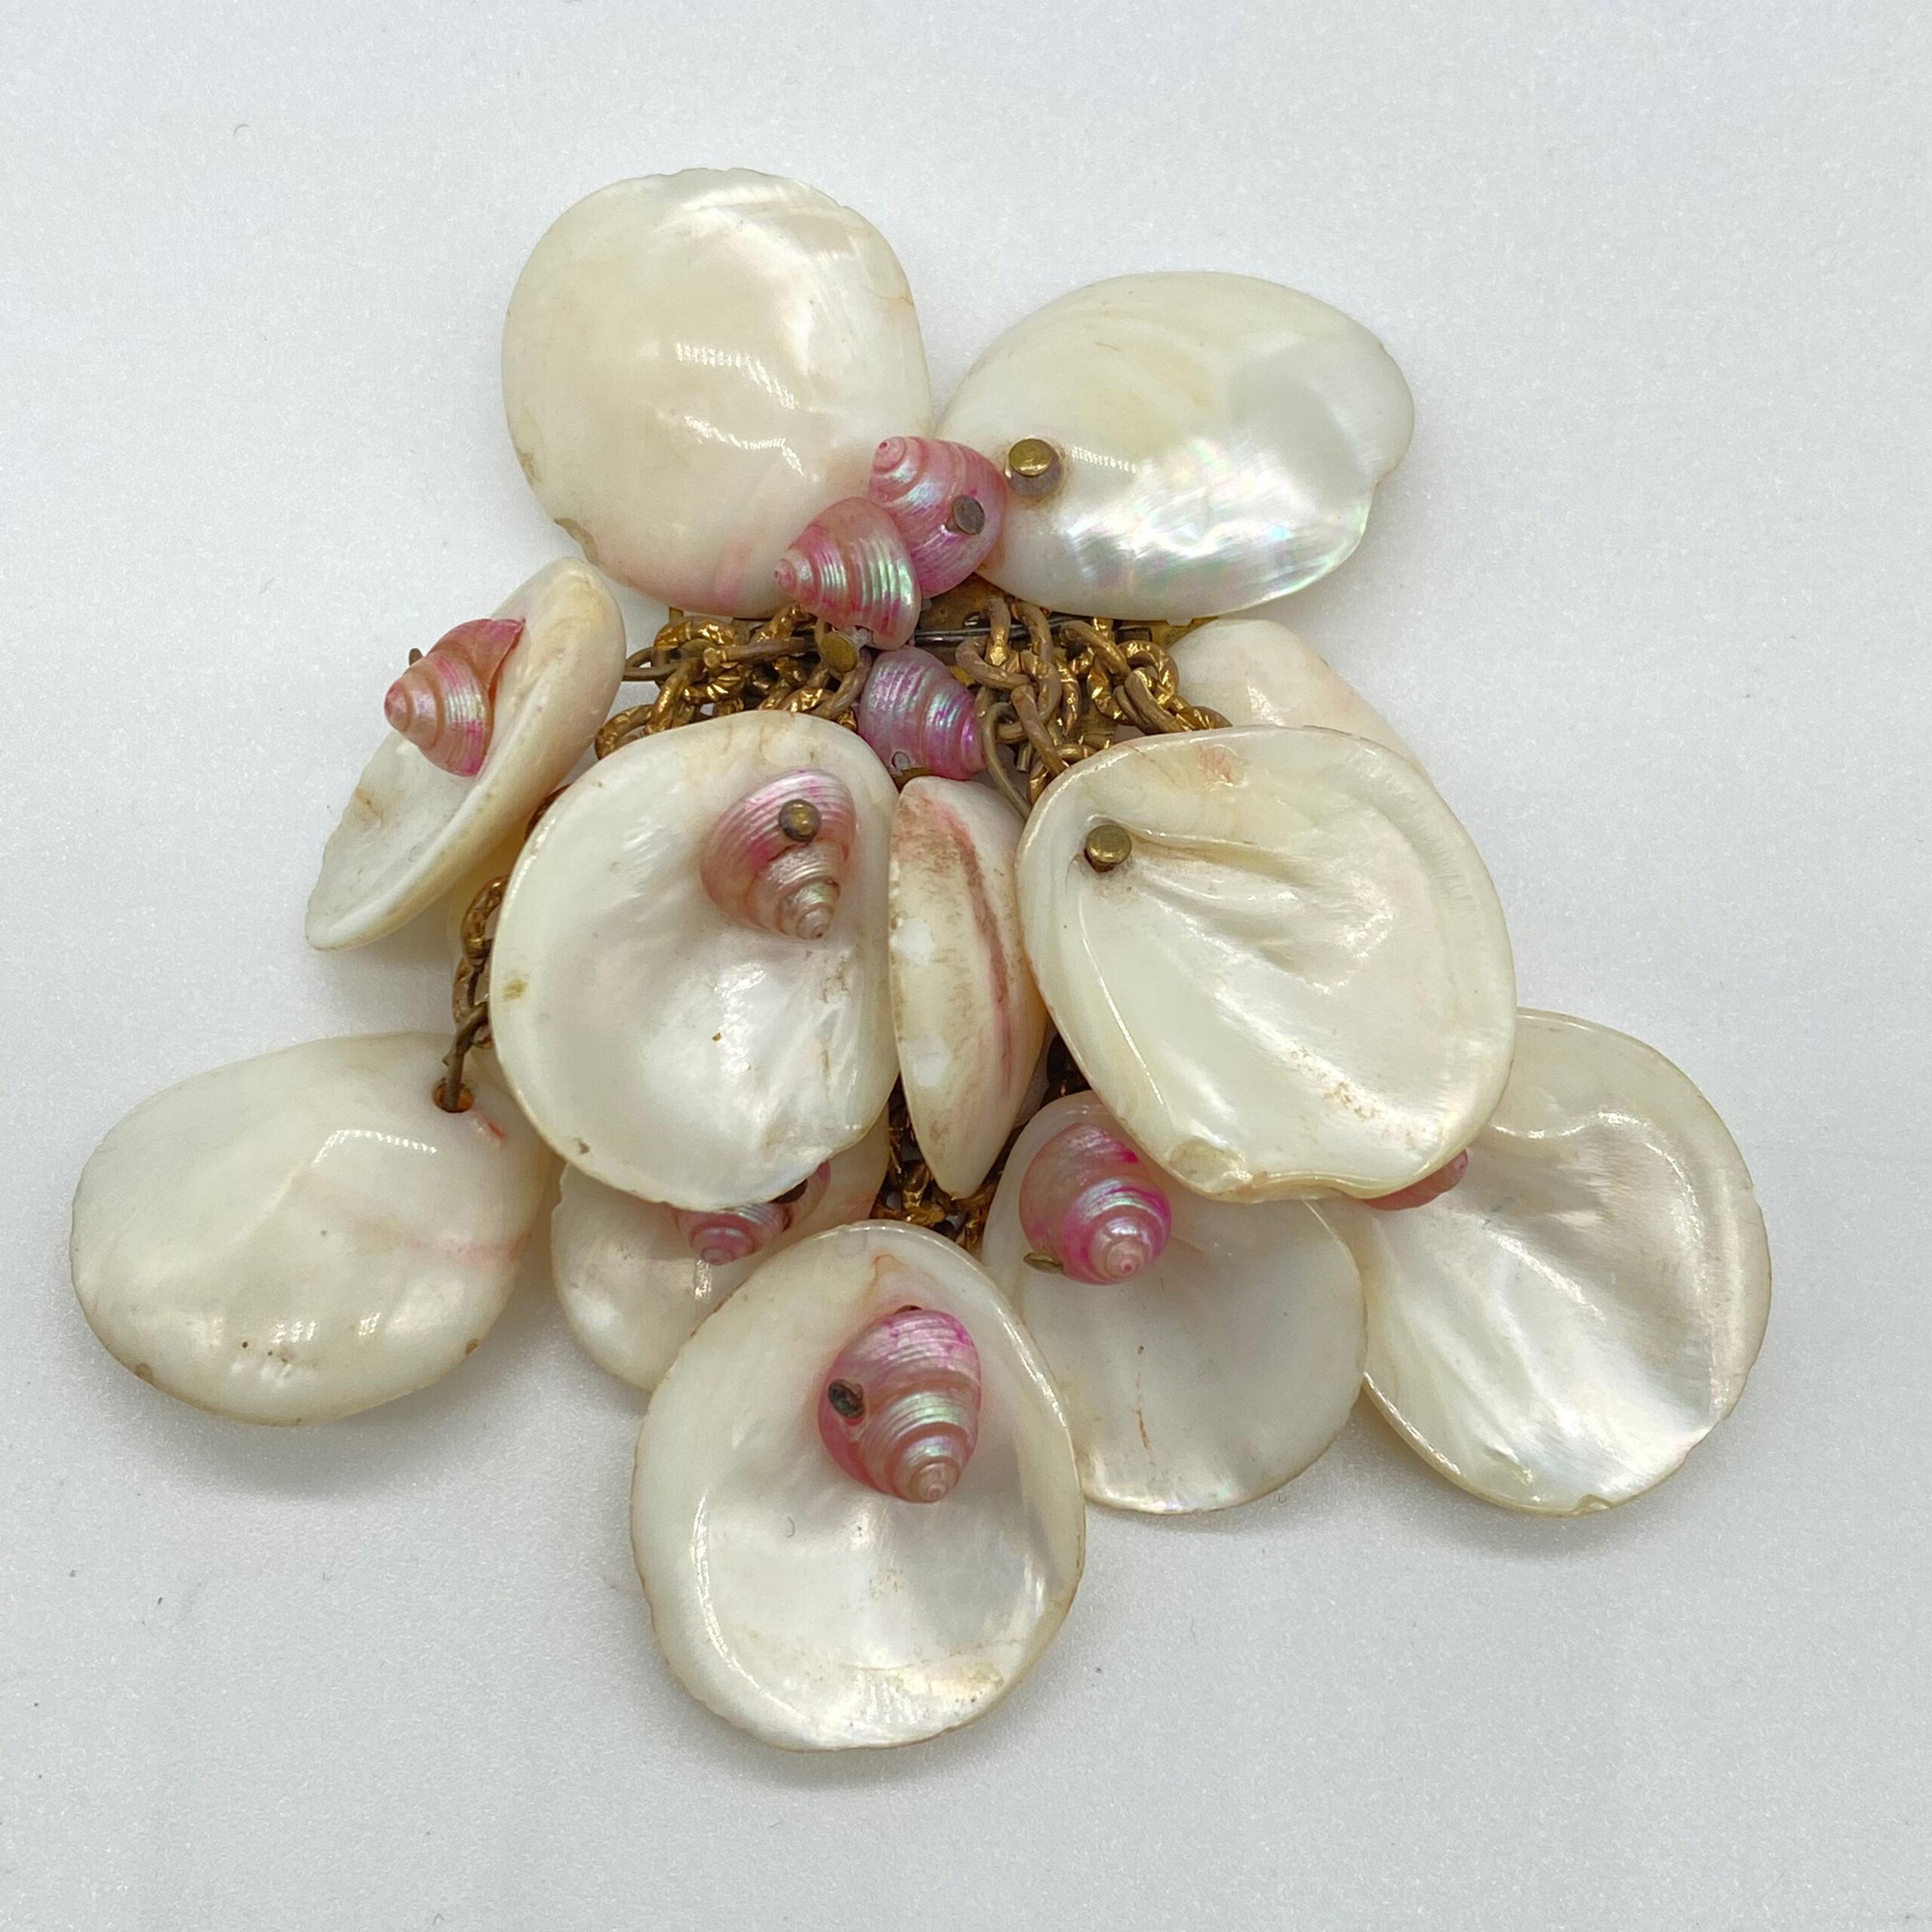 Lovely Vintage Floral Pearl Brooch with Rhinestone Accents